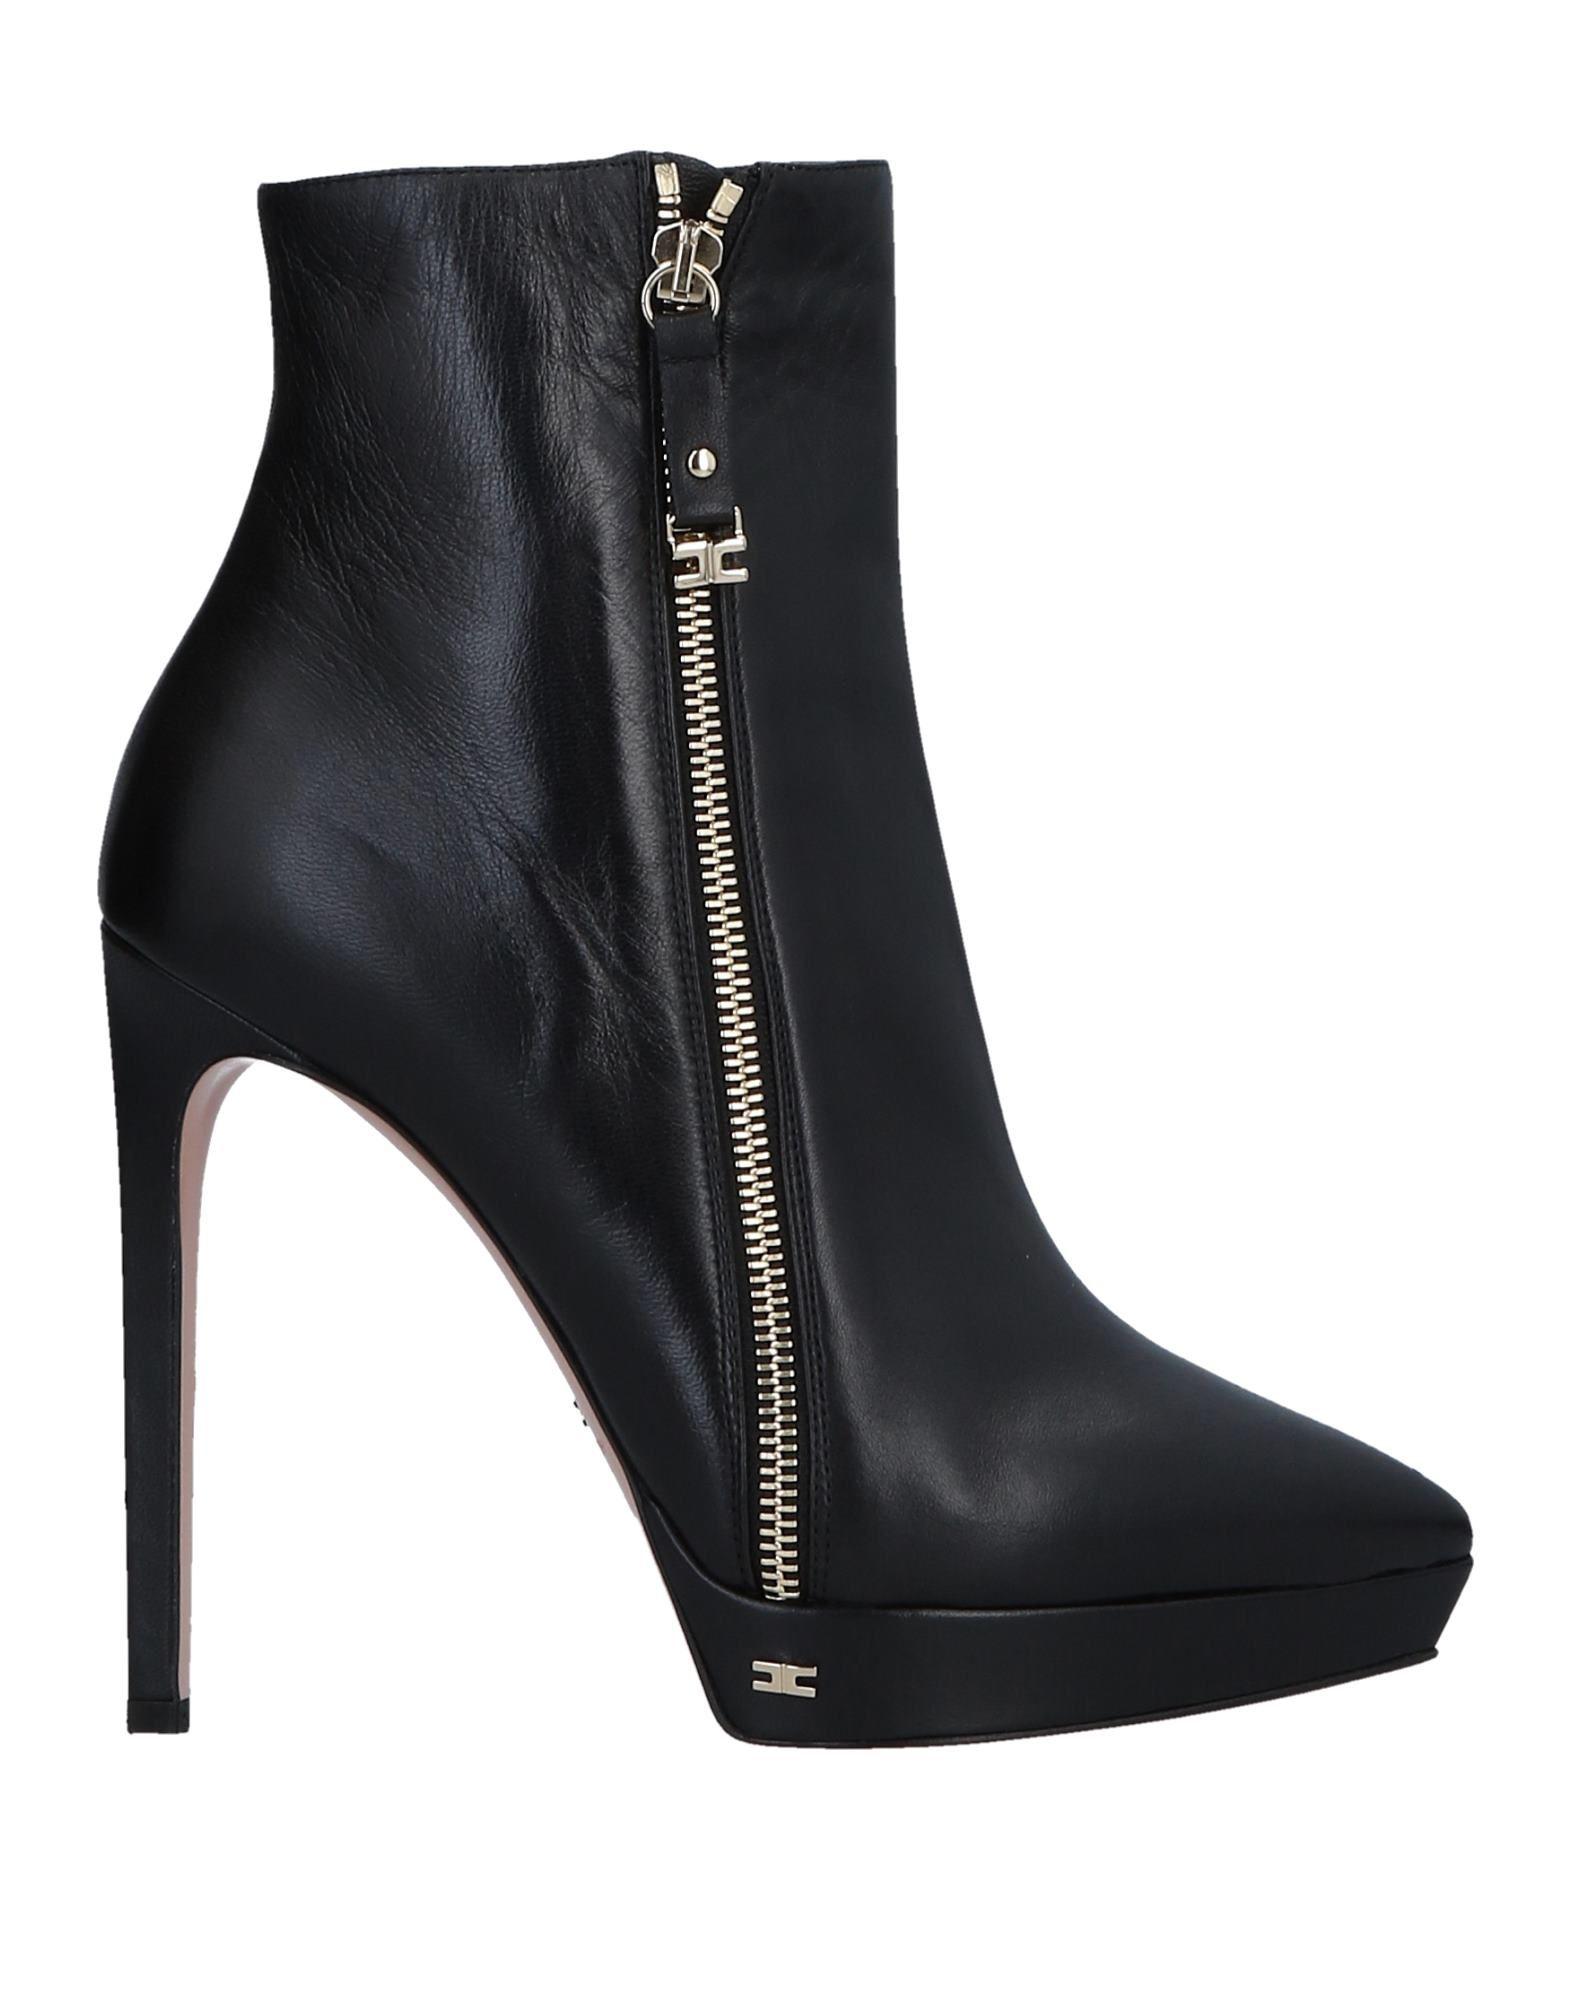 Elisabetta Franchi Leather Ankle Boots in Black - Lyst